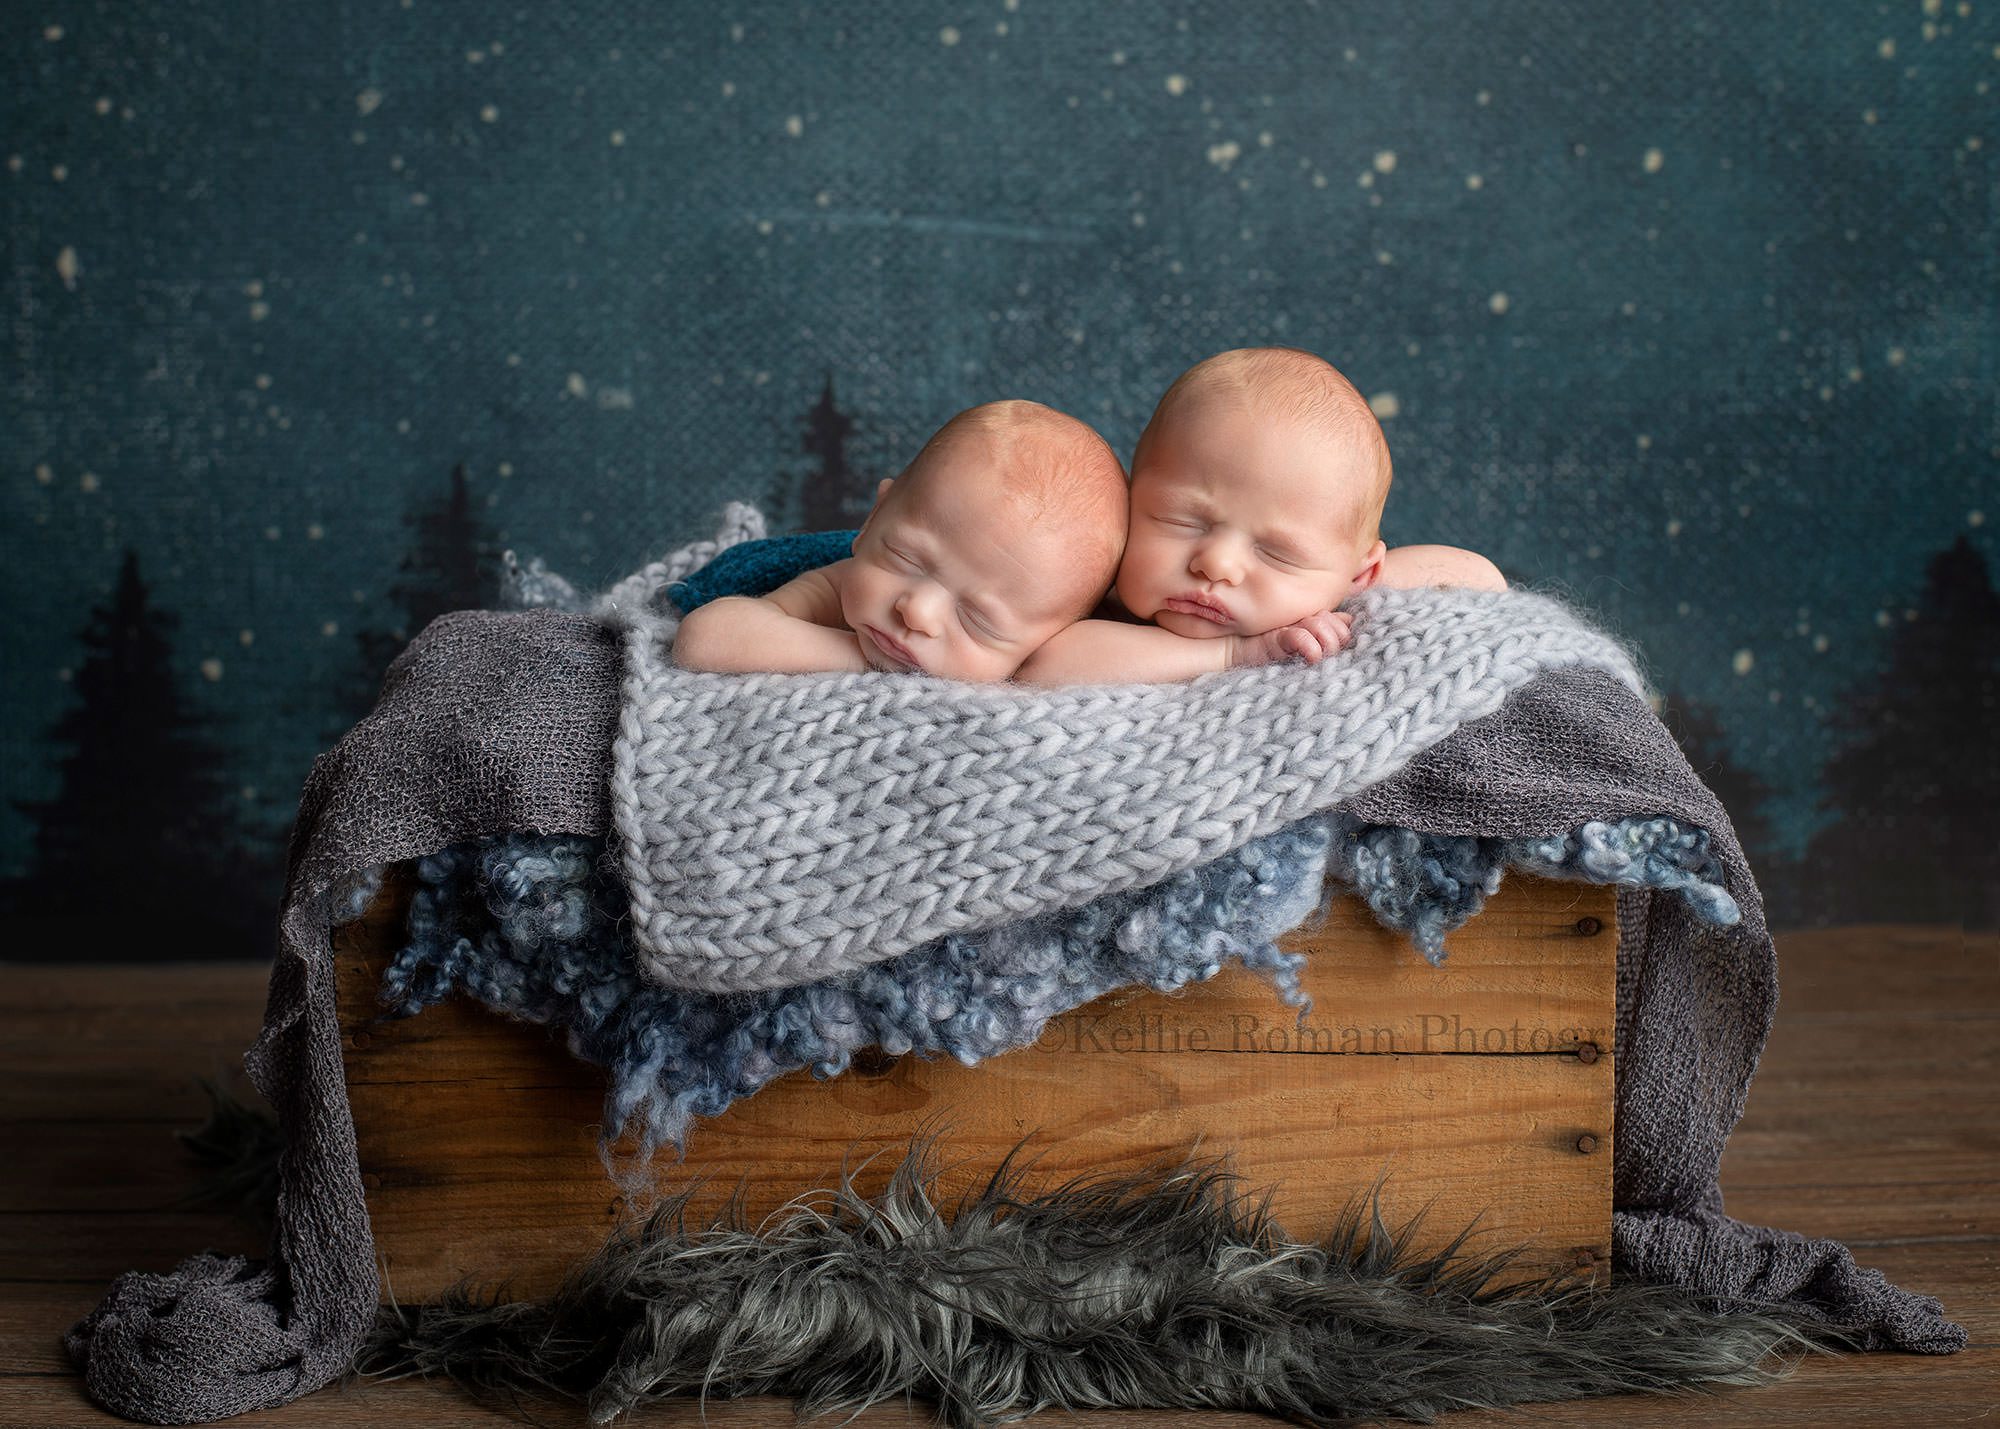 newborn twin pics twin newborn brothers posed with their chins on their arms upright in a wood crate the cate is filled with different grey and blue textured fabric the crate is on top of a wood floor and the backdrop is dark blue with stars and black pine trees both of the boys are sleeping in a milwaukee photo studio